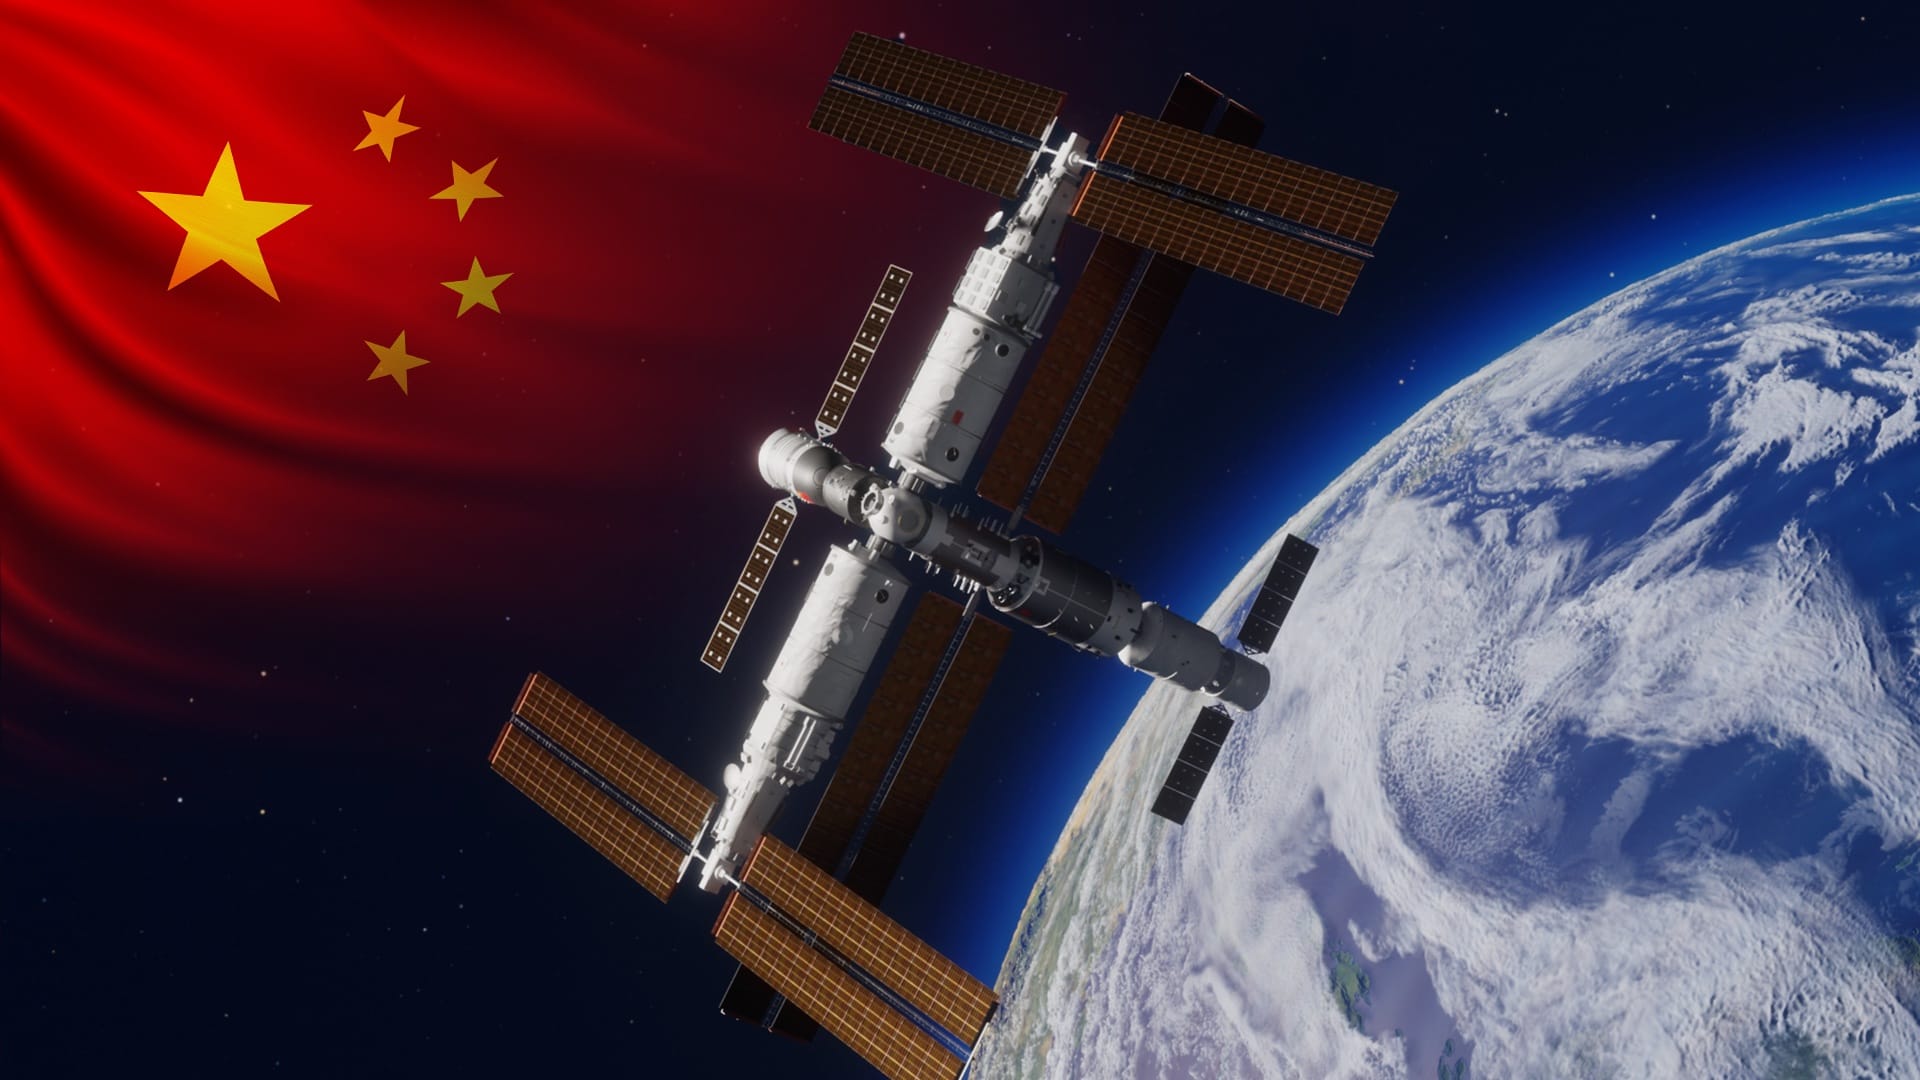 Tiangong Space Station with the flag of China